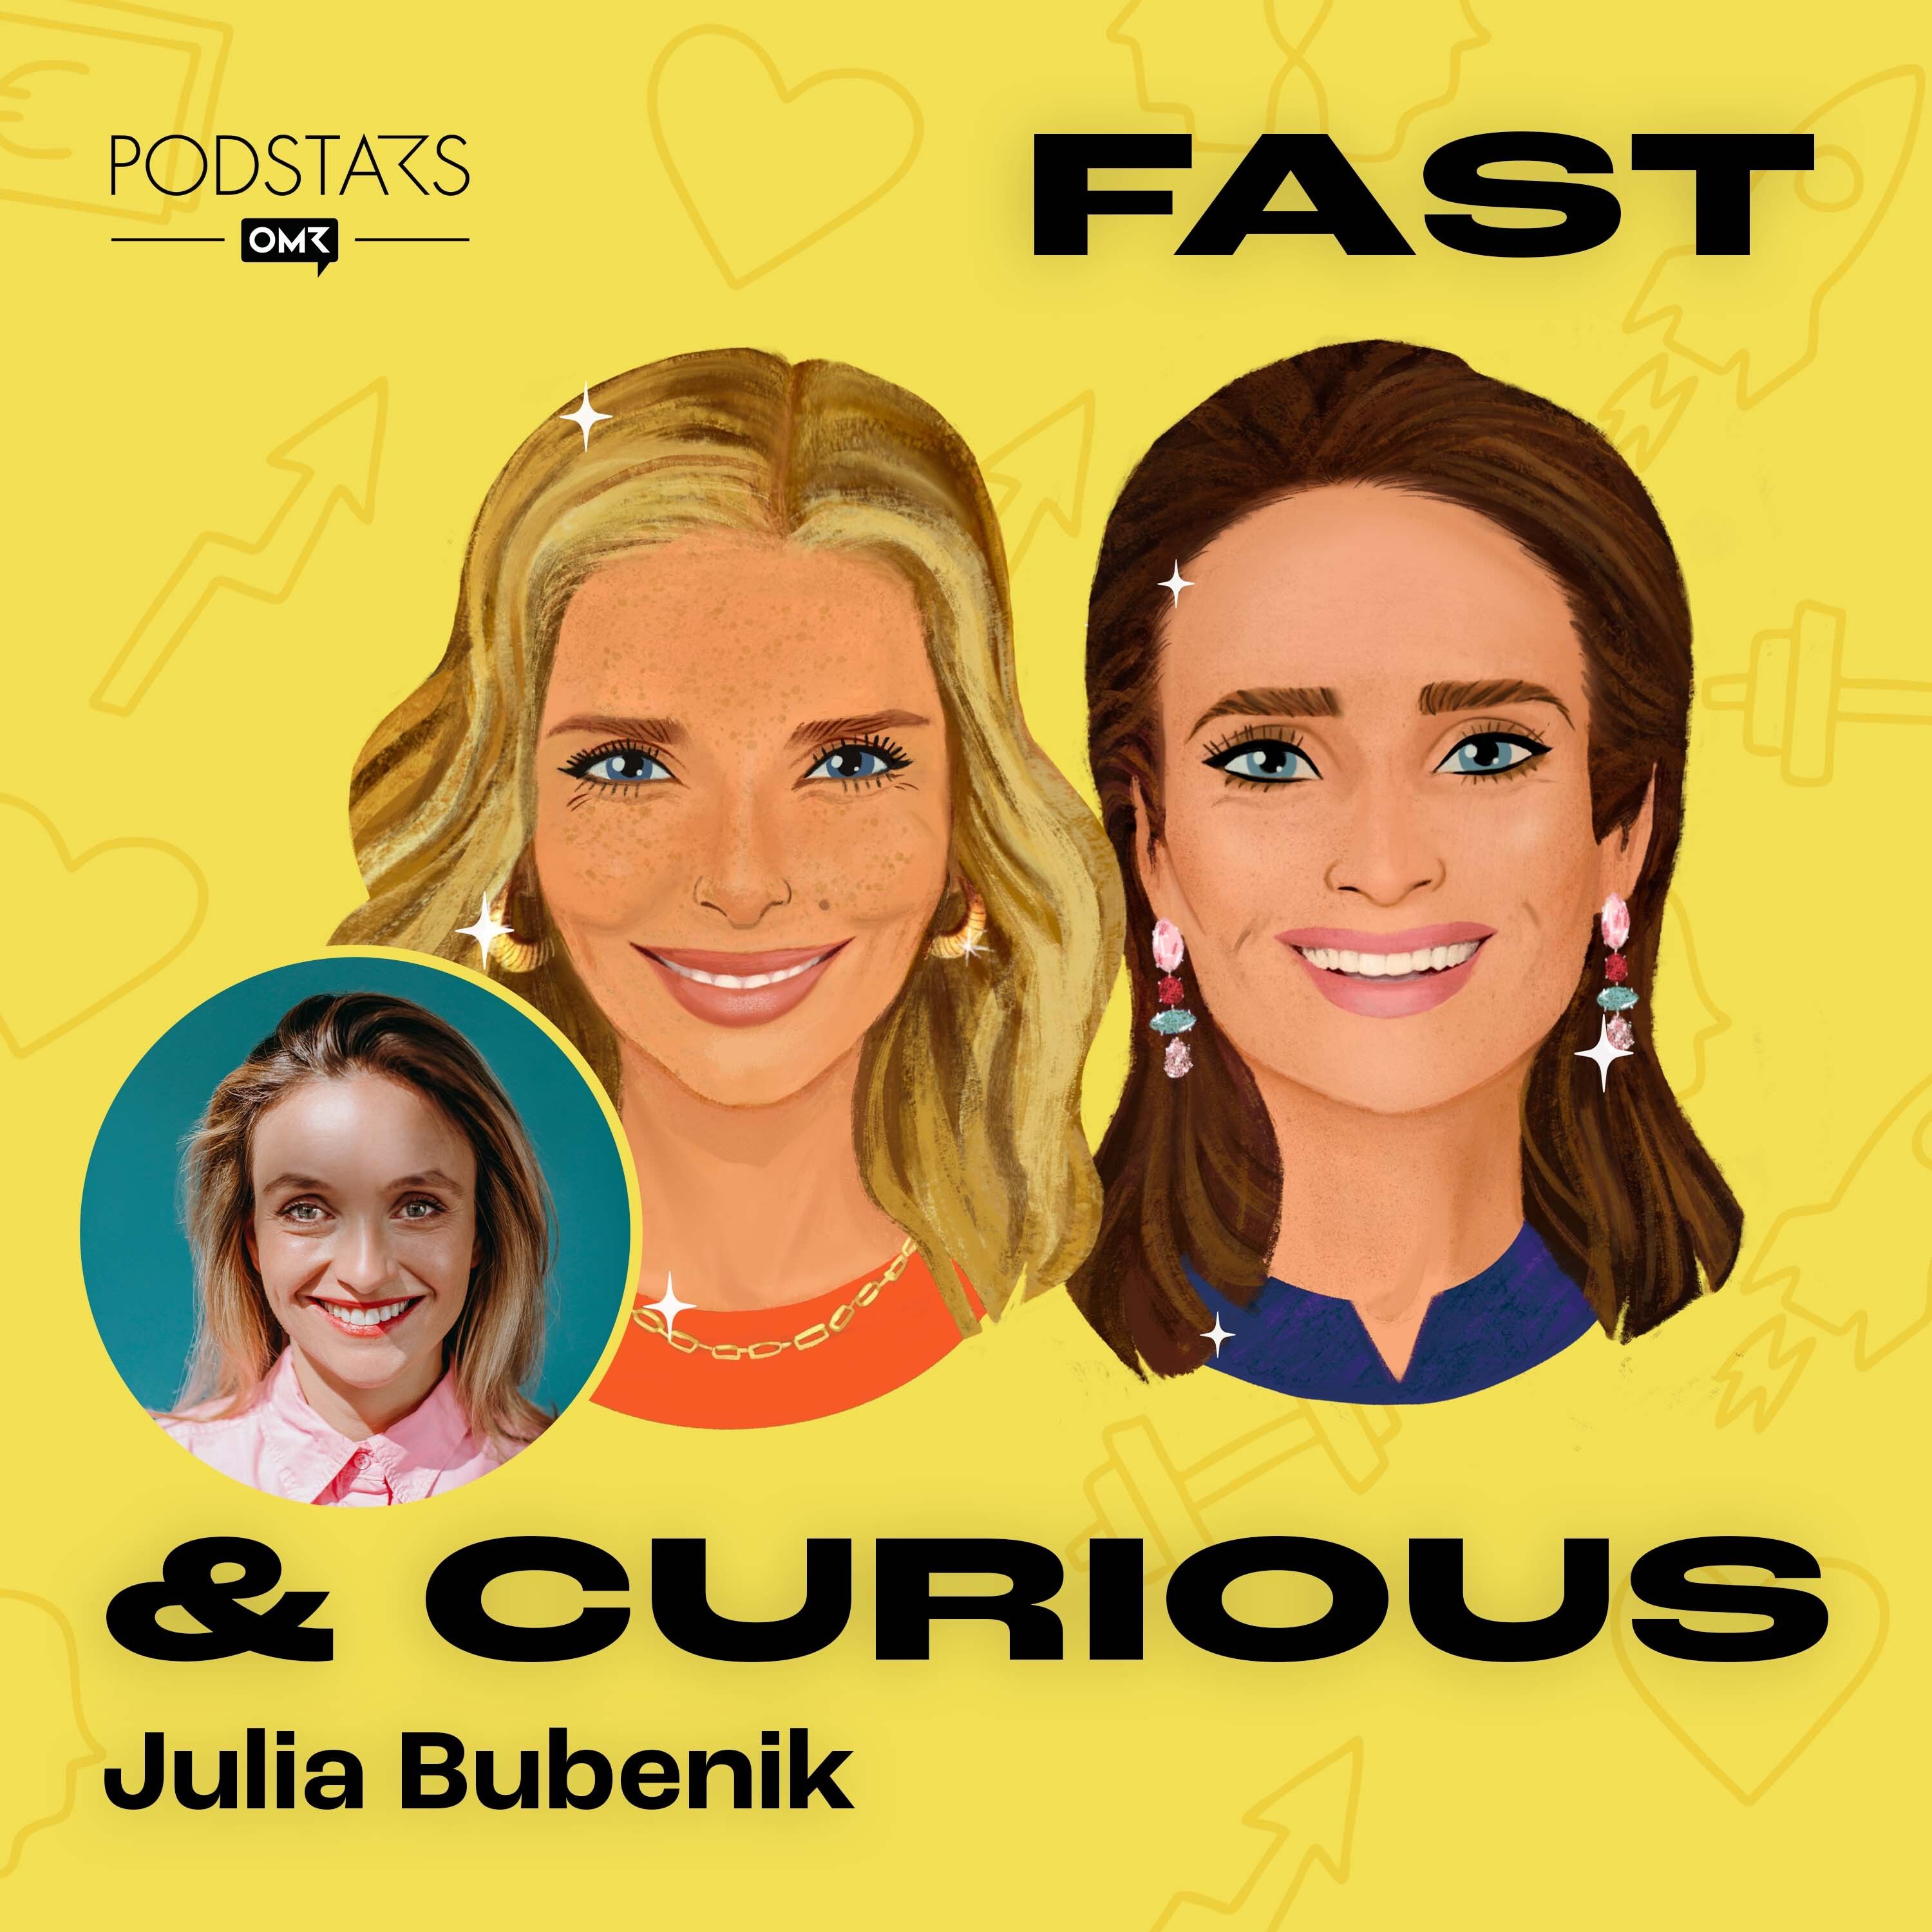 FAST & CURIOUS - Podcast